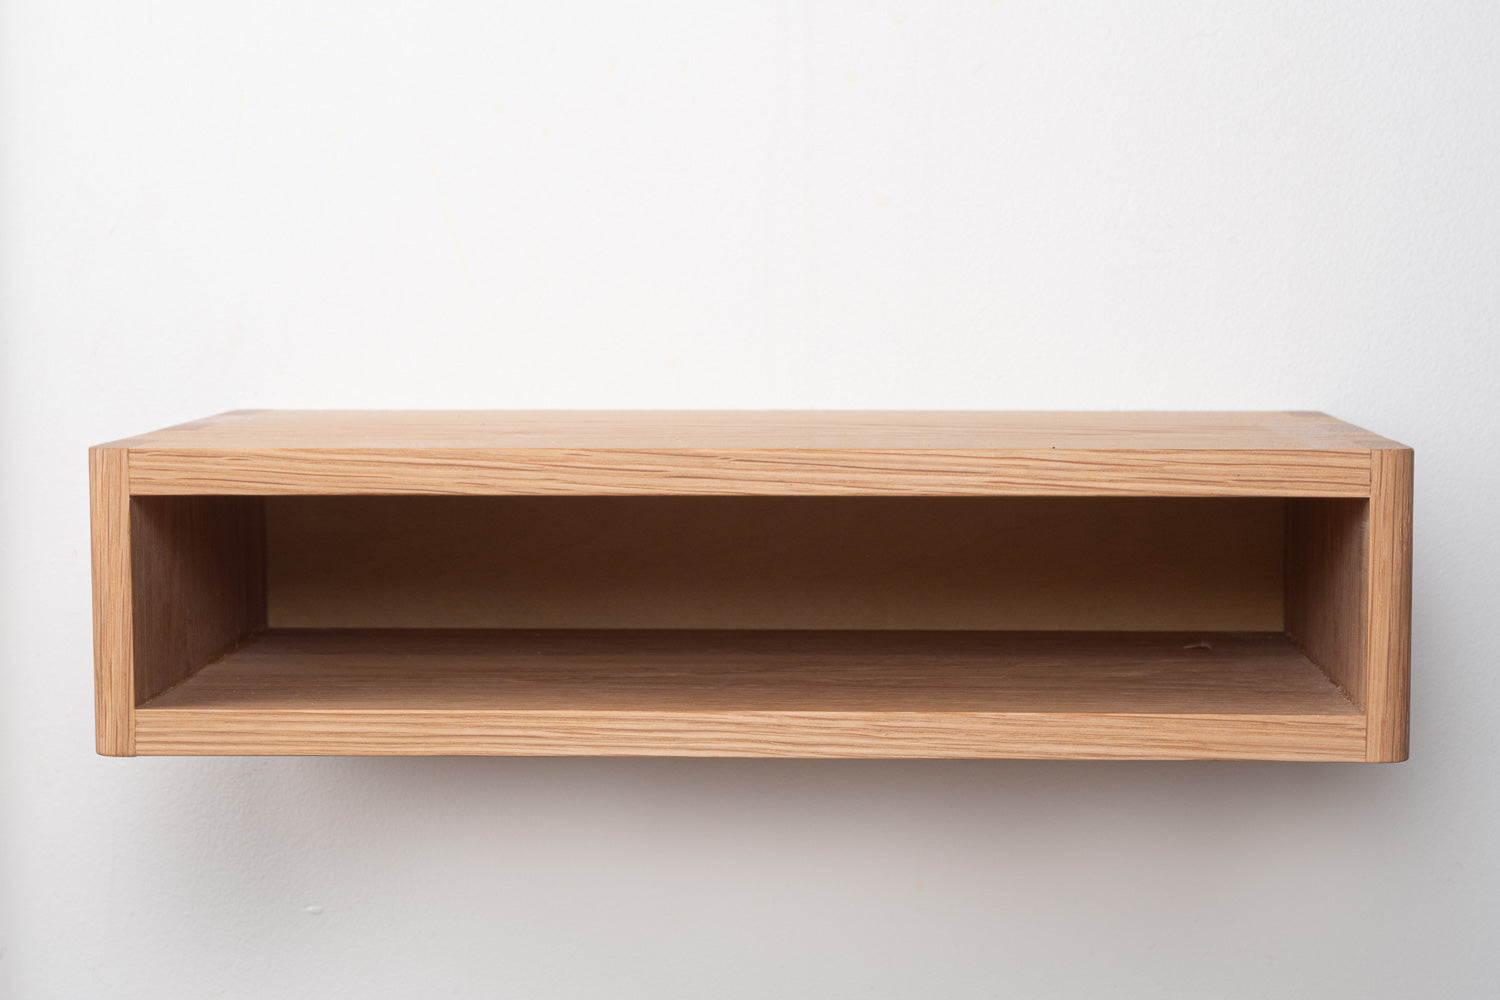 Mesa Bedside Shelf in White Oak pictured in front view. Designed and made by Hey, Porter.